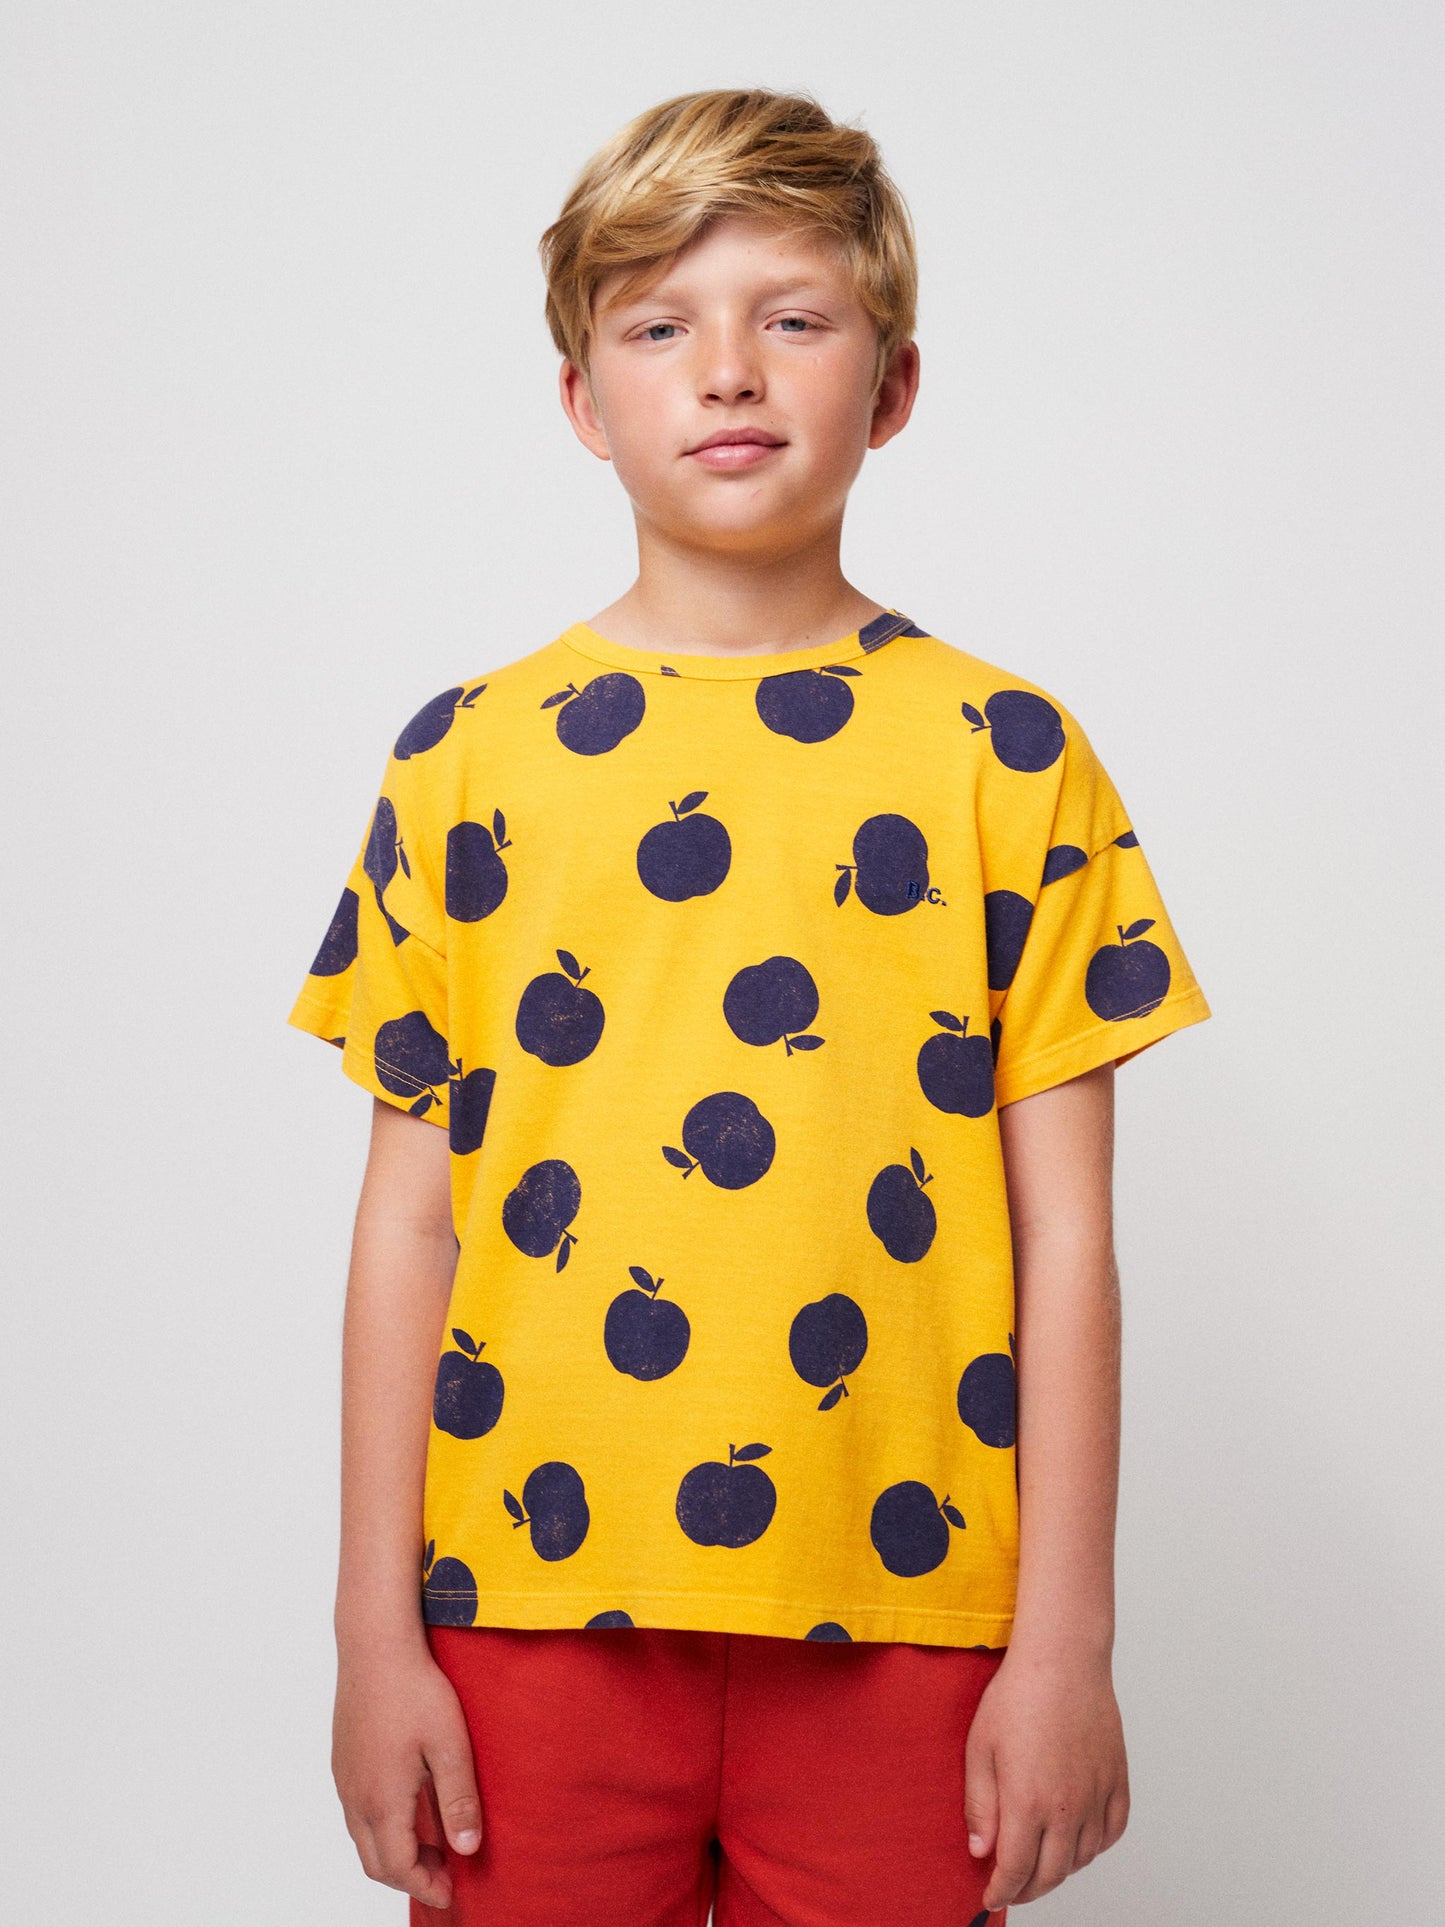 Poma all over yellow T-shirt